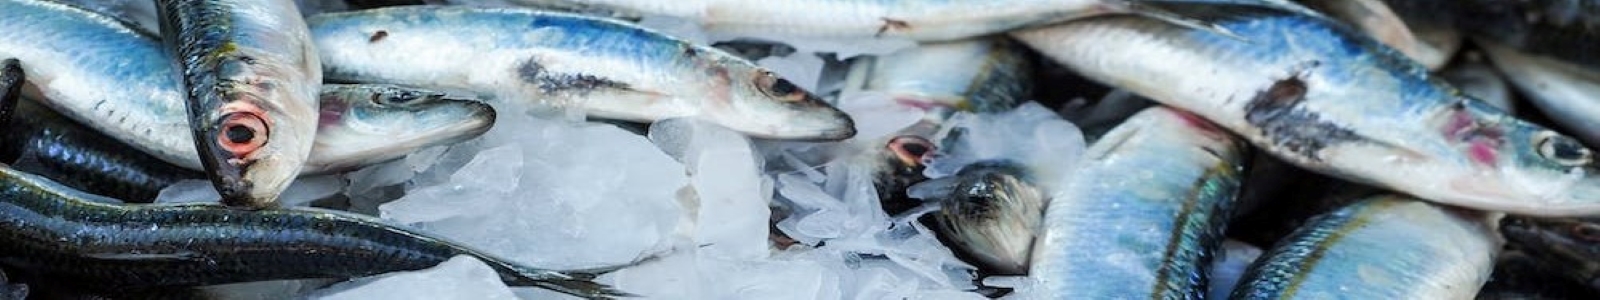 freshly caught fish stored on ice